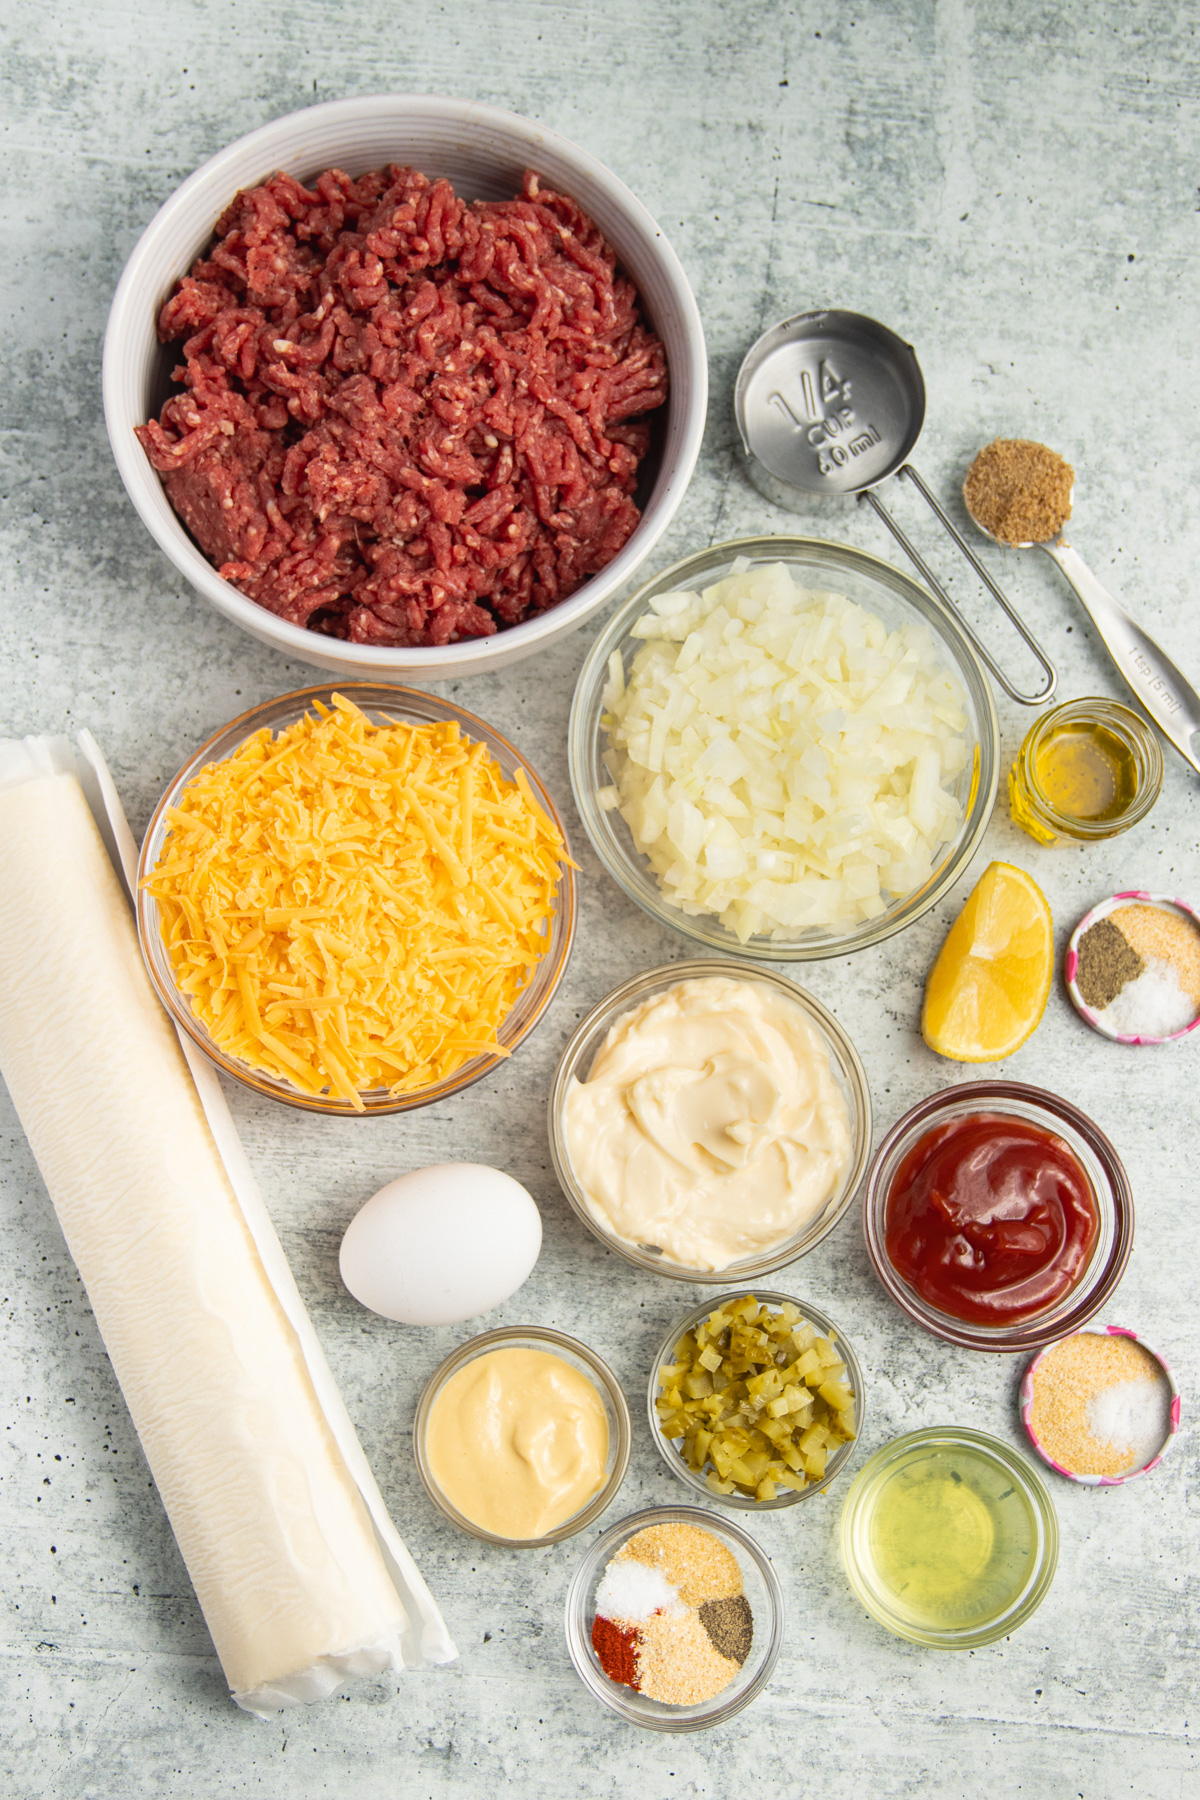 This is a picture of all the individual ingredients to make this recipe.